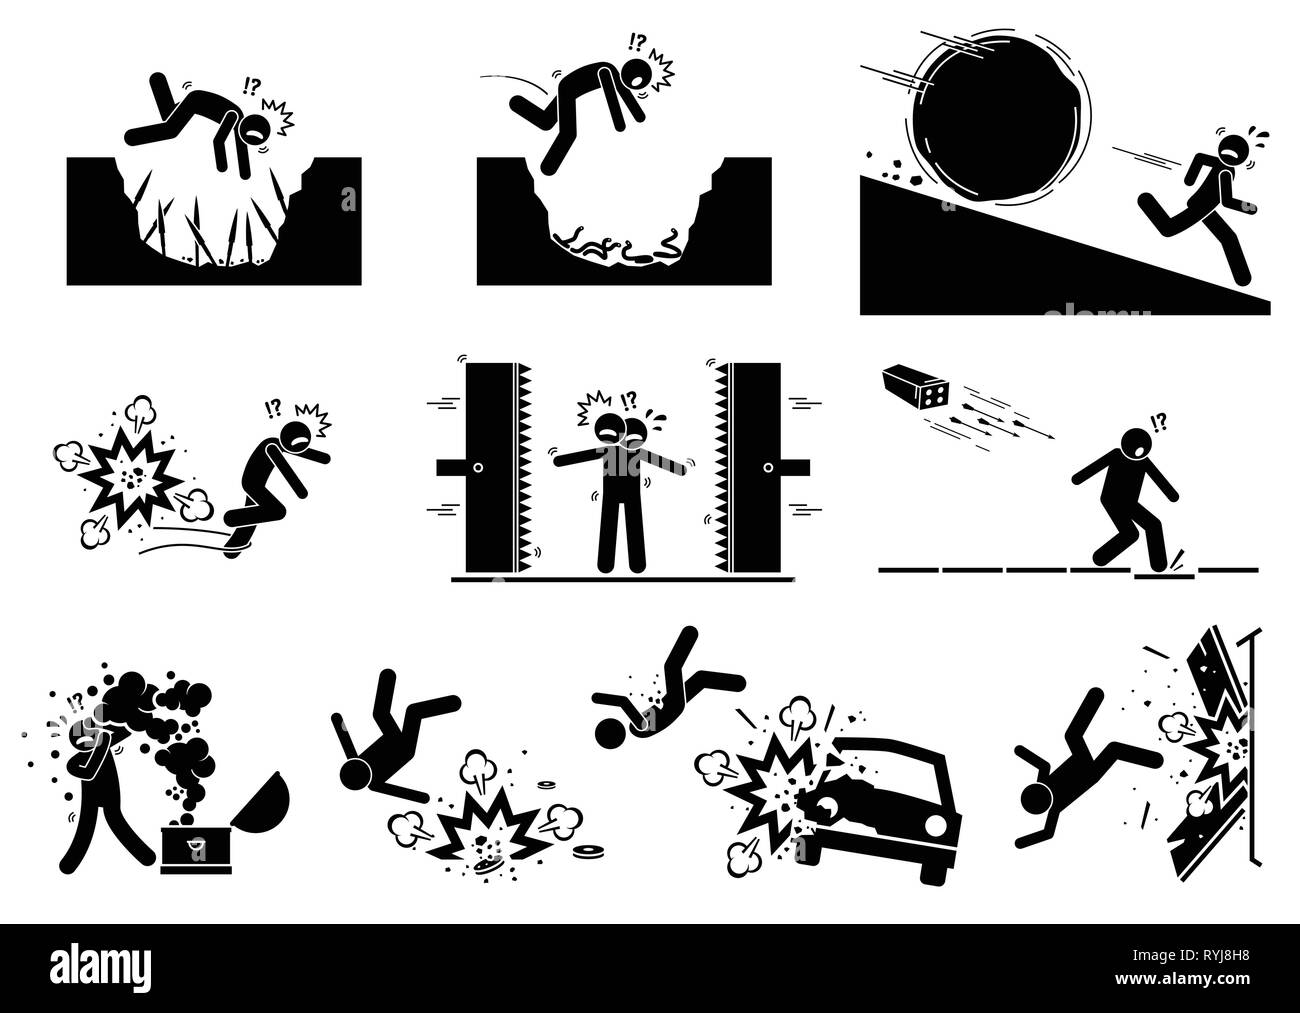 Booby trap pictograms. Stick figure icons depict ancient and modern booby trap setup that kill human. Stock Vector